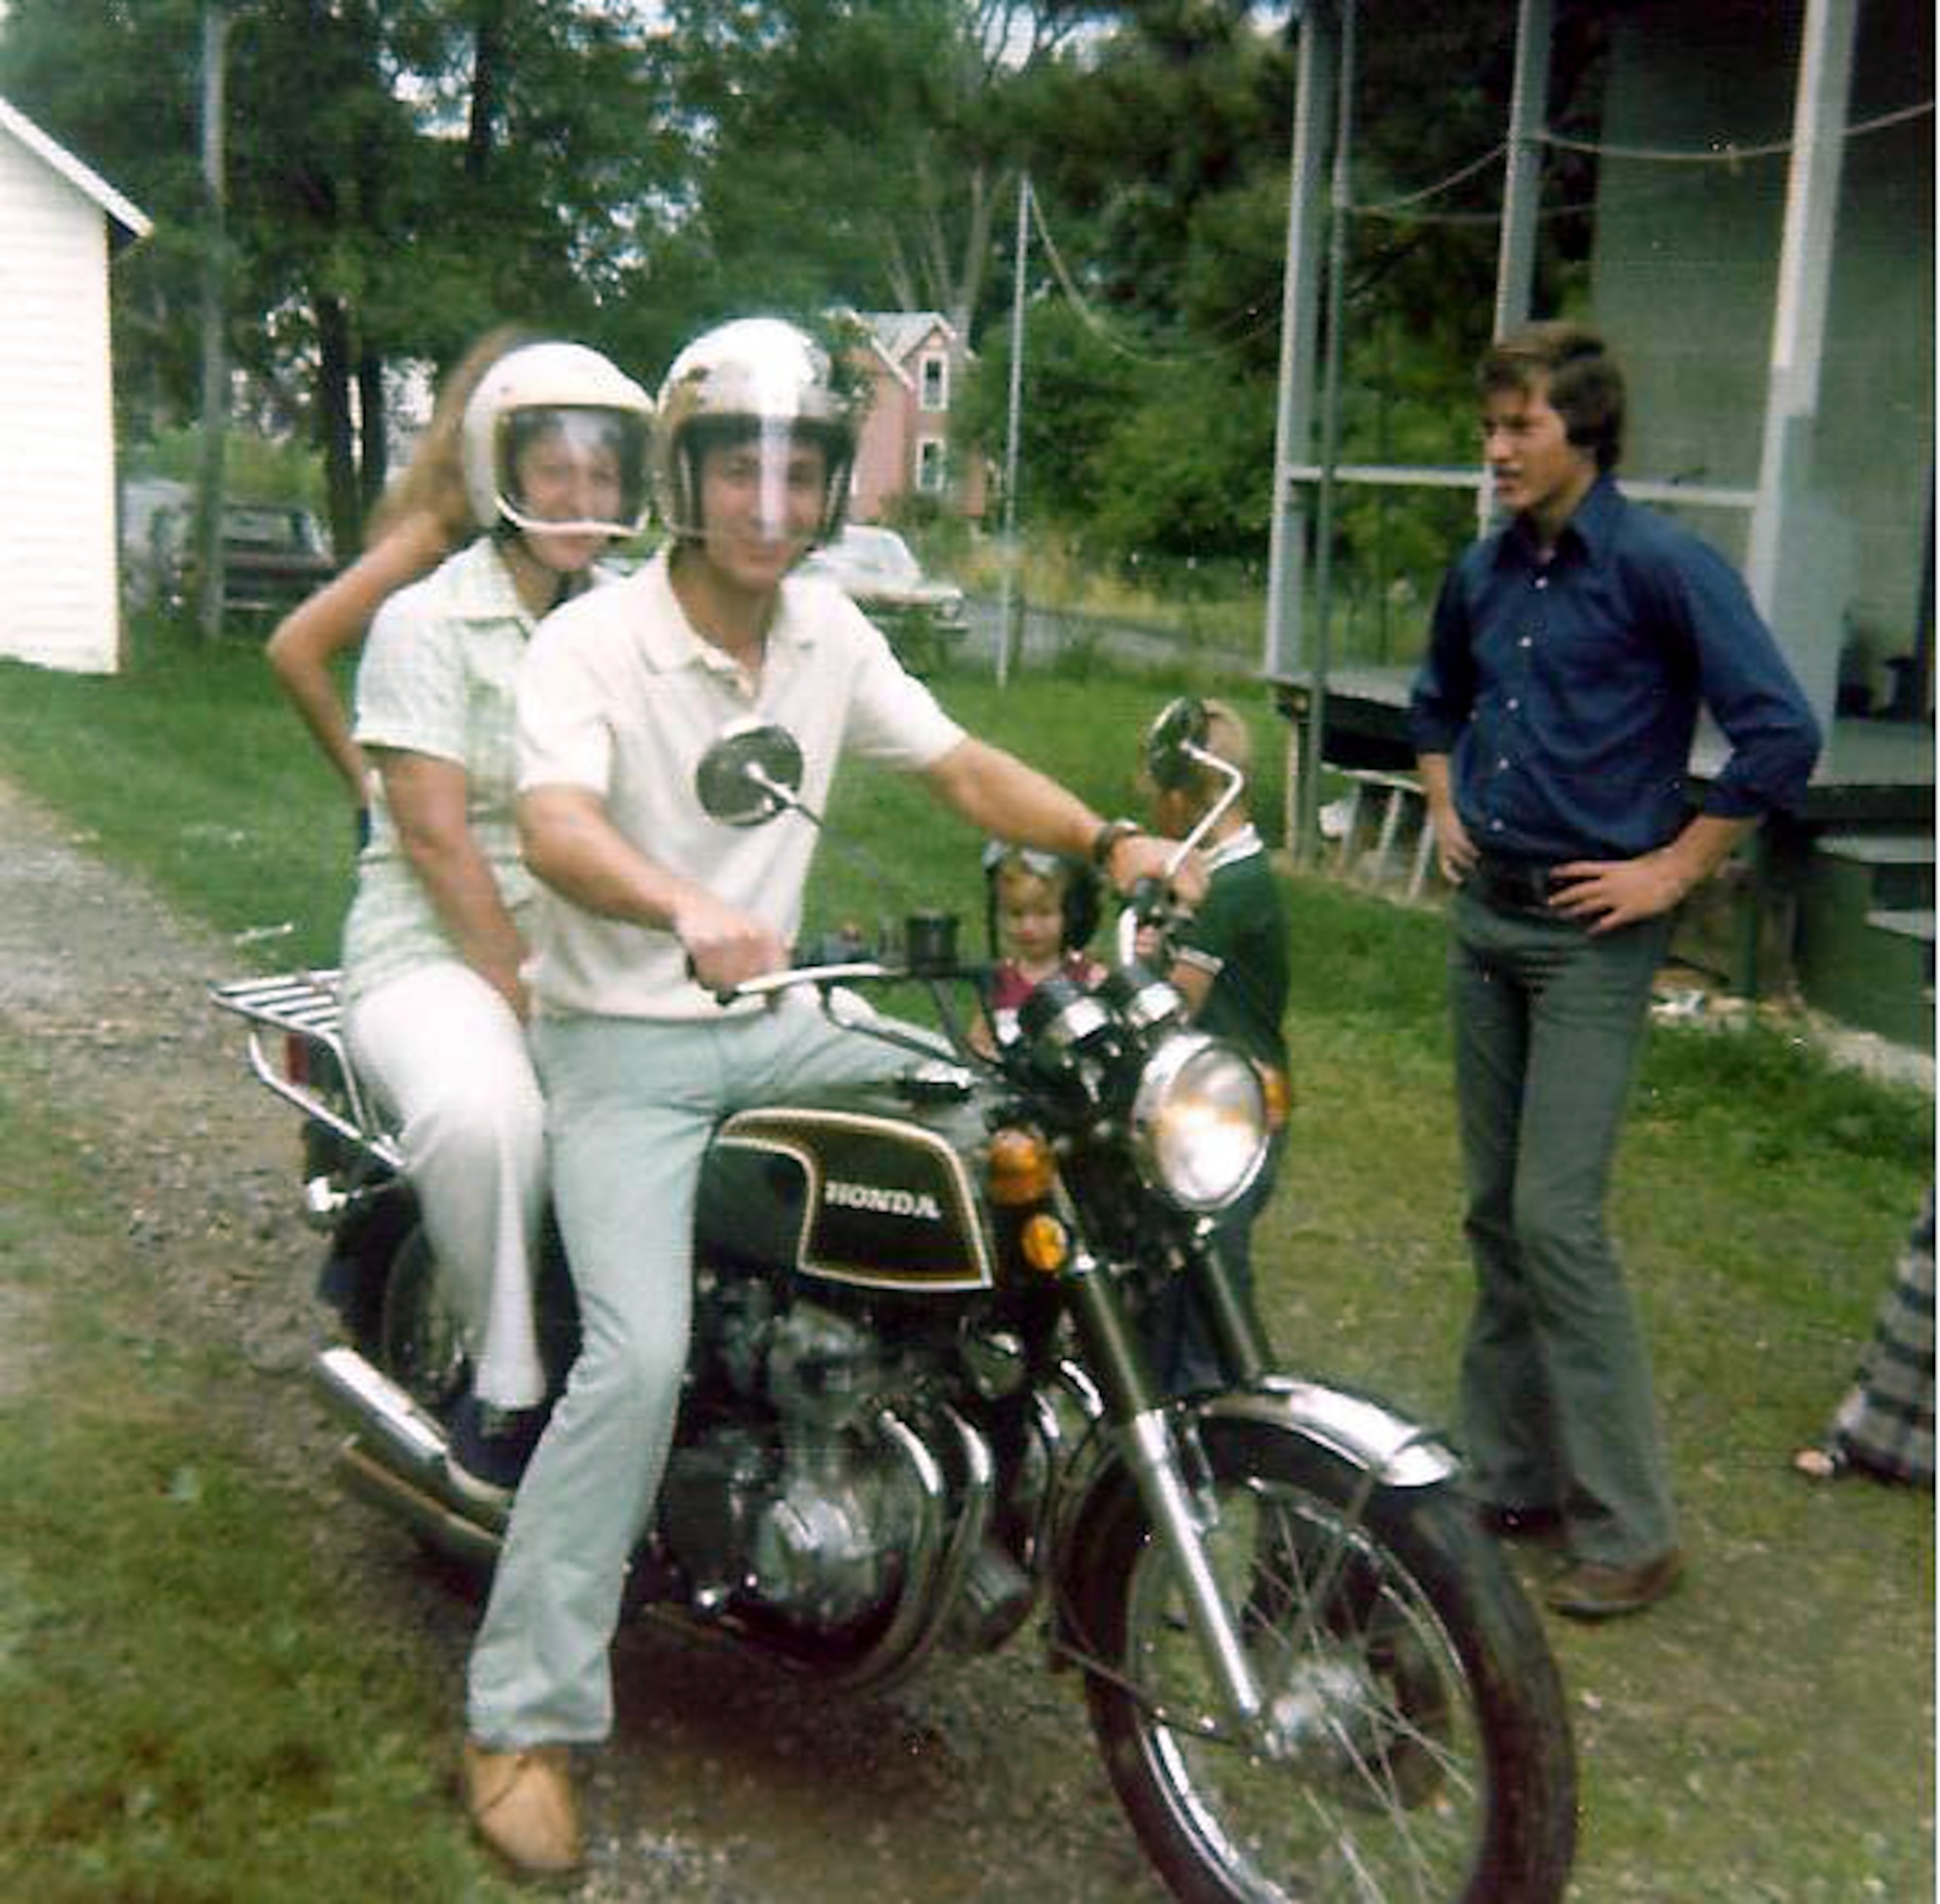 Eric Crabtree prepares to take his mother, Ruth, for a ride on his motorcycle near their Cassadaga, N.Y. home in 1974 while his younger brother, Scott looks on.  (Courtesy photo)